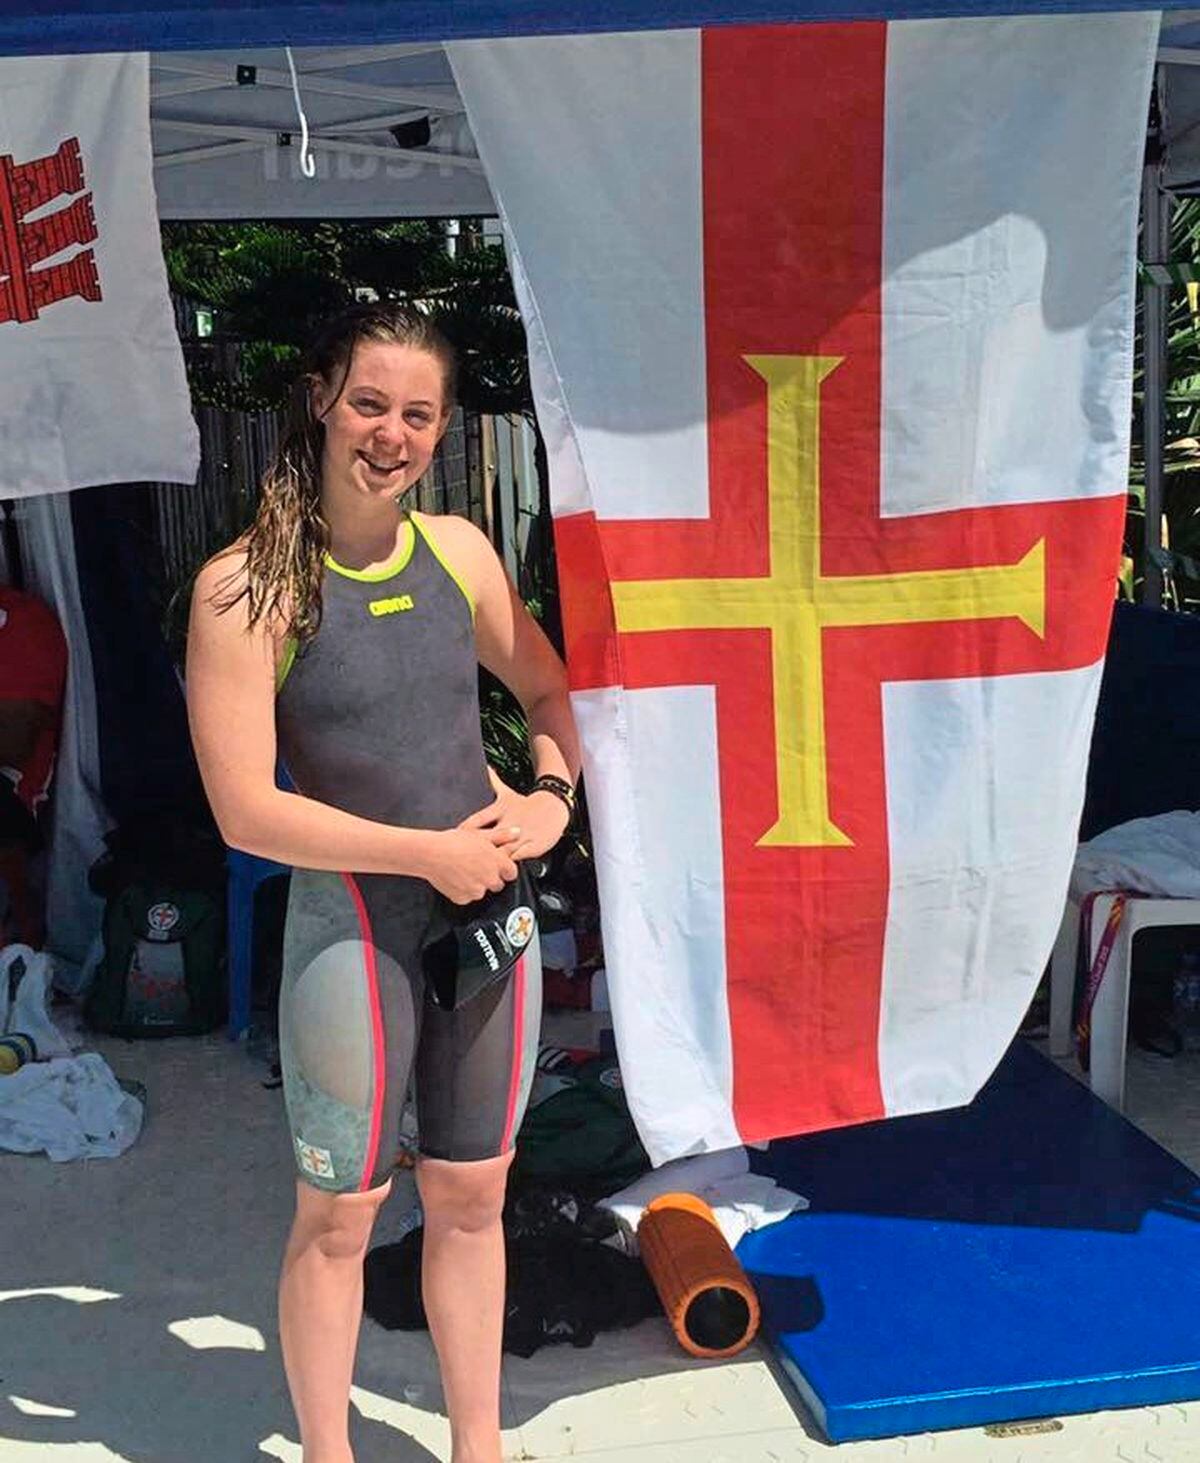 Proudly flying the Guernsey flag, 14-year-old Tatiana Tostevin, (Picture by Guernsey Commonwealth Games Association, 21124653)